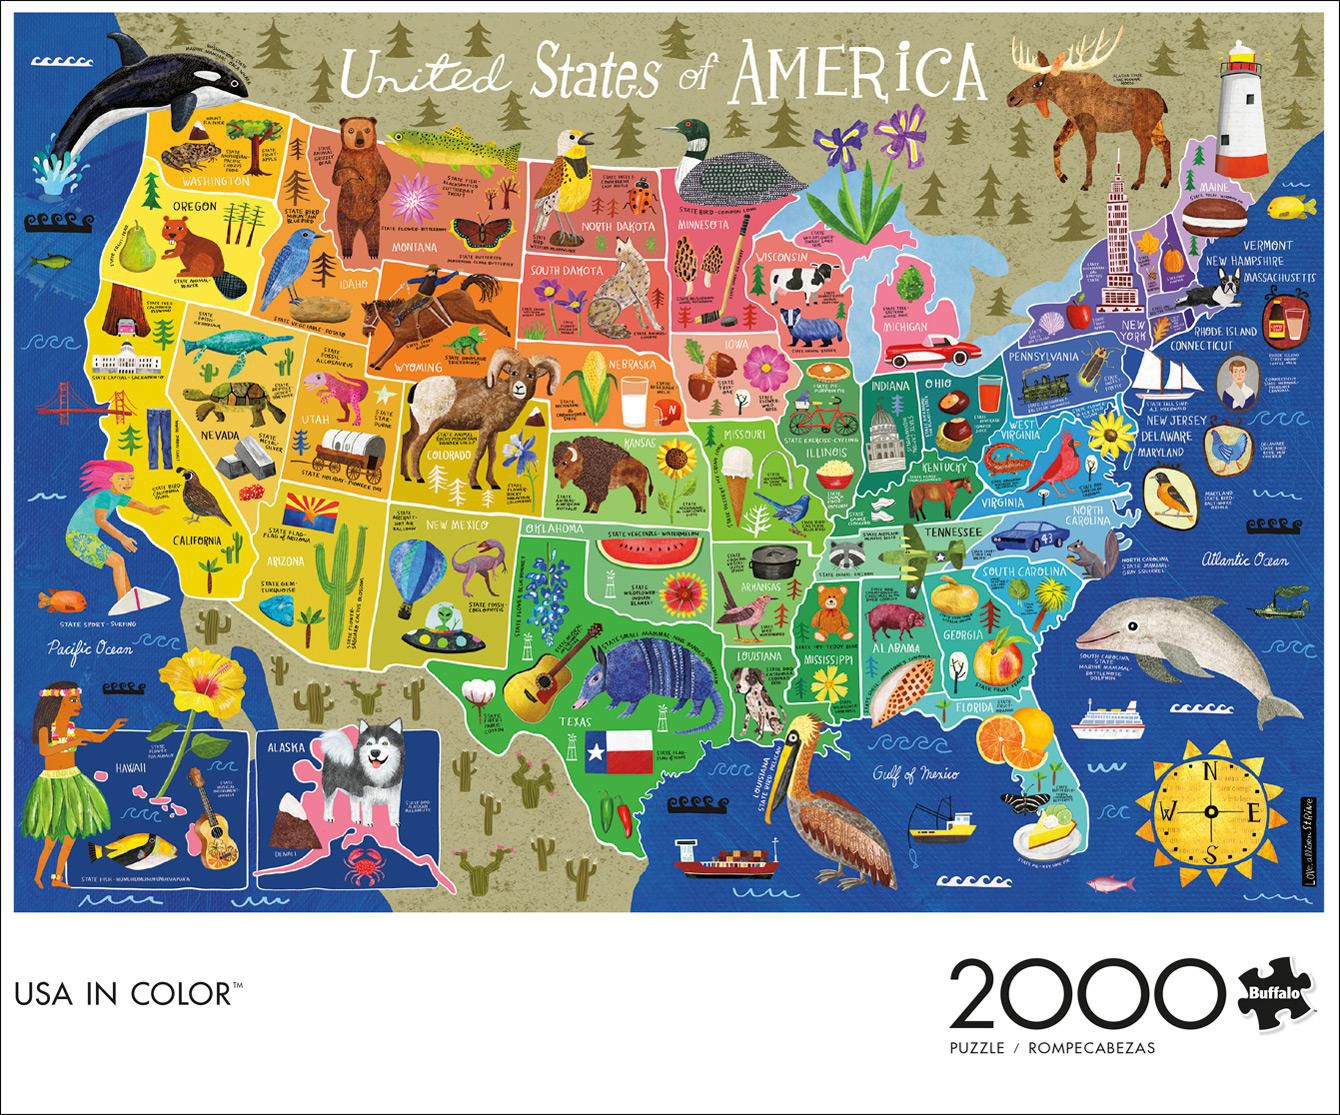 Buffalo Games - USA in Color - 2000 Piece Jigsaw Puzzle 